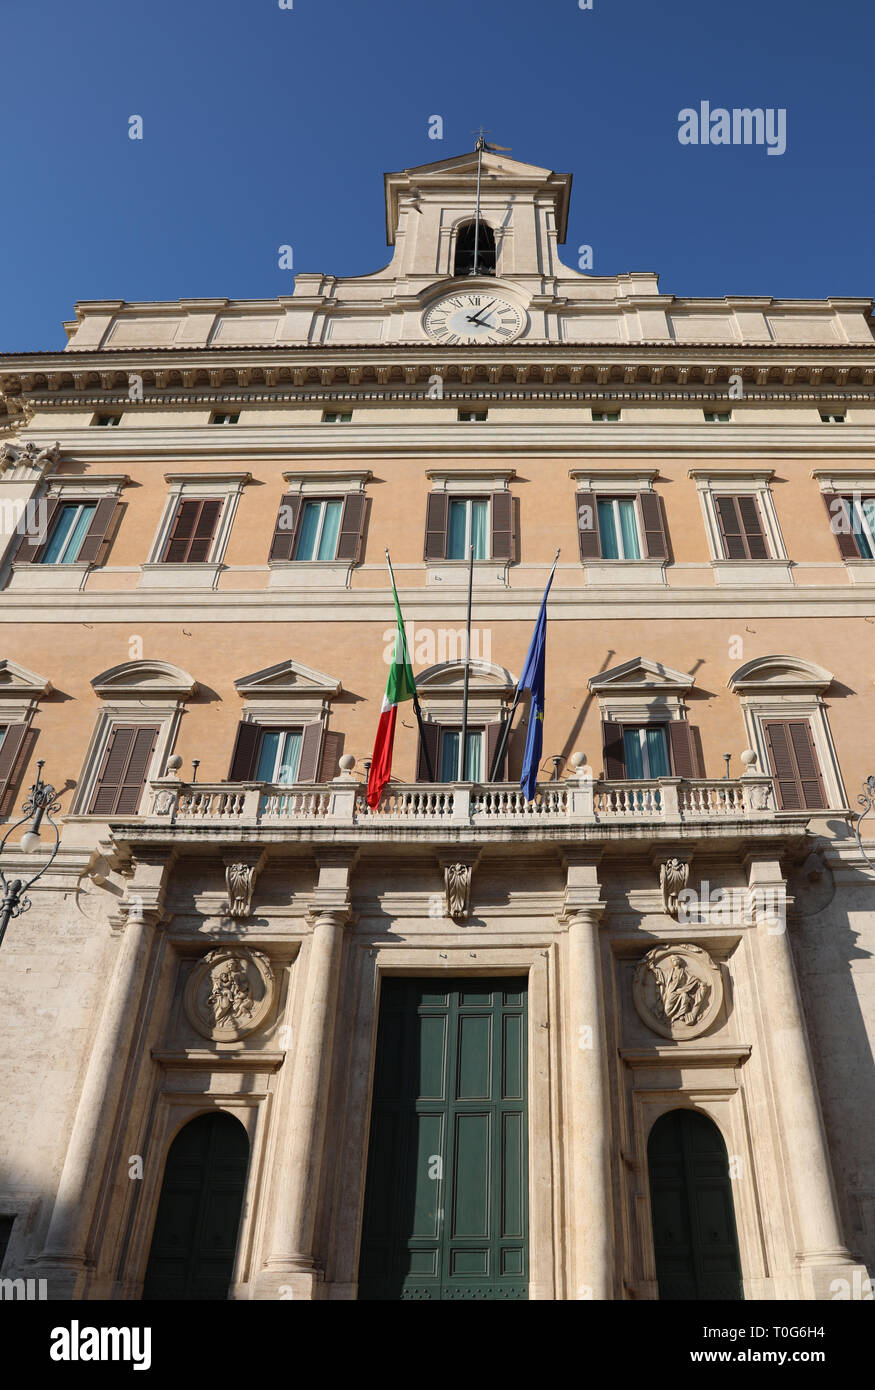 Entrance to the Montecitorio Palace in Rome Italy  headquarter of the Italian Parliament with flags Stock Photo